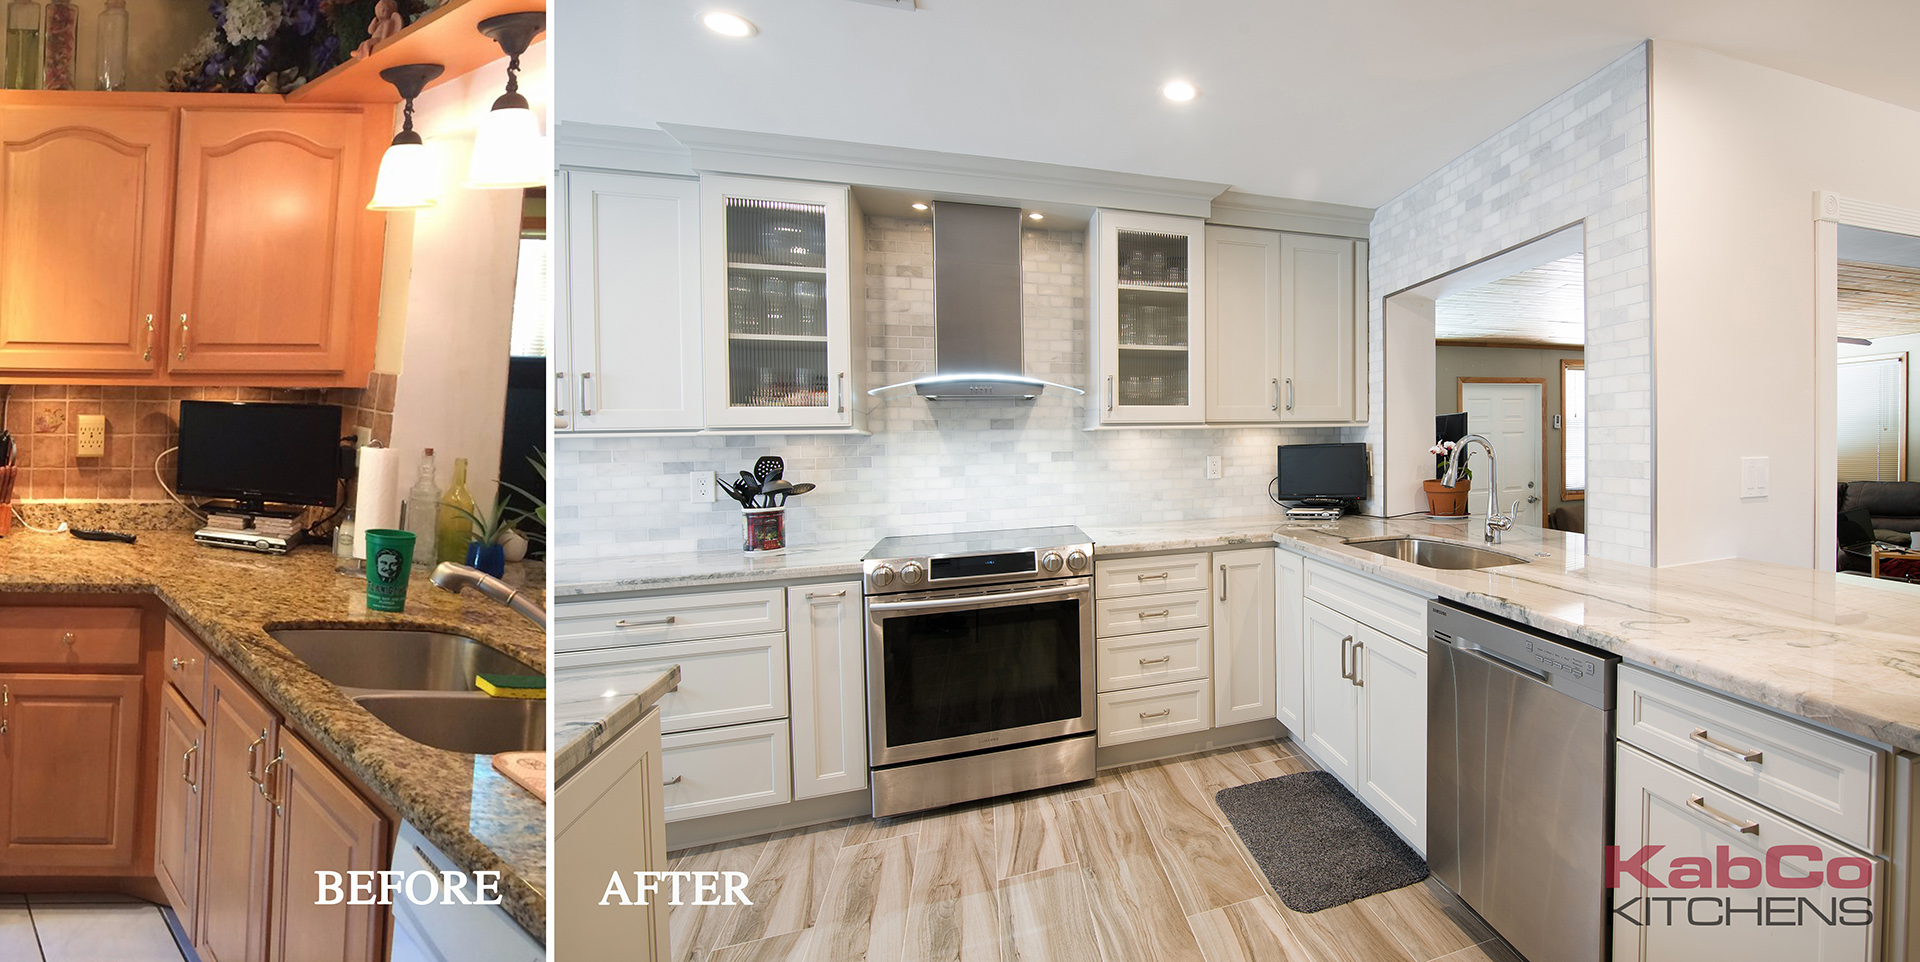 Before and After Kitchen & Bath Remodels